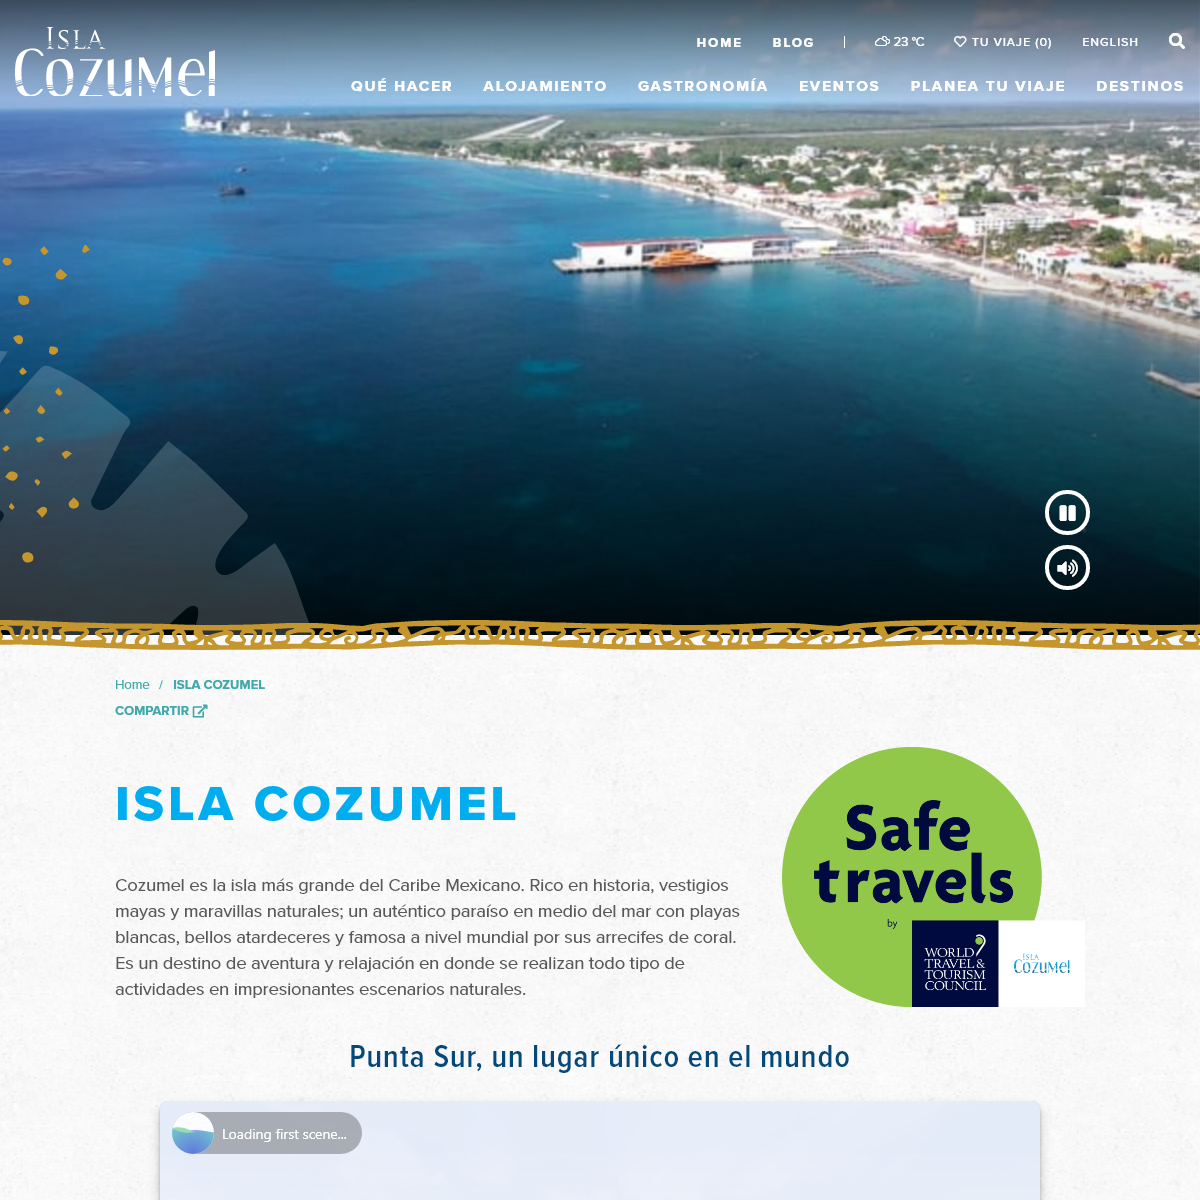 A complete backup of cozumel.travel